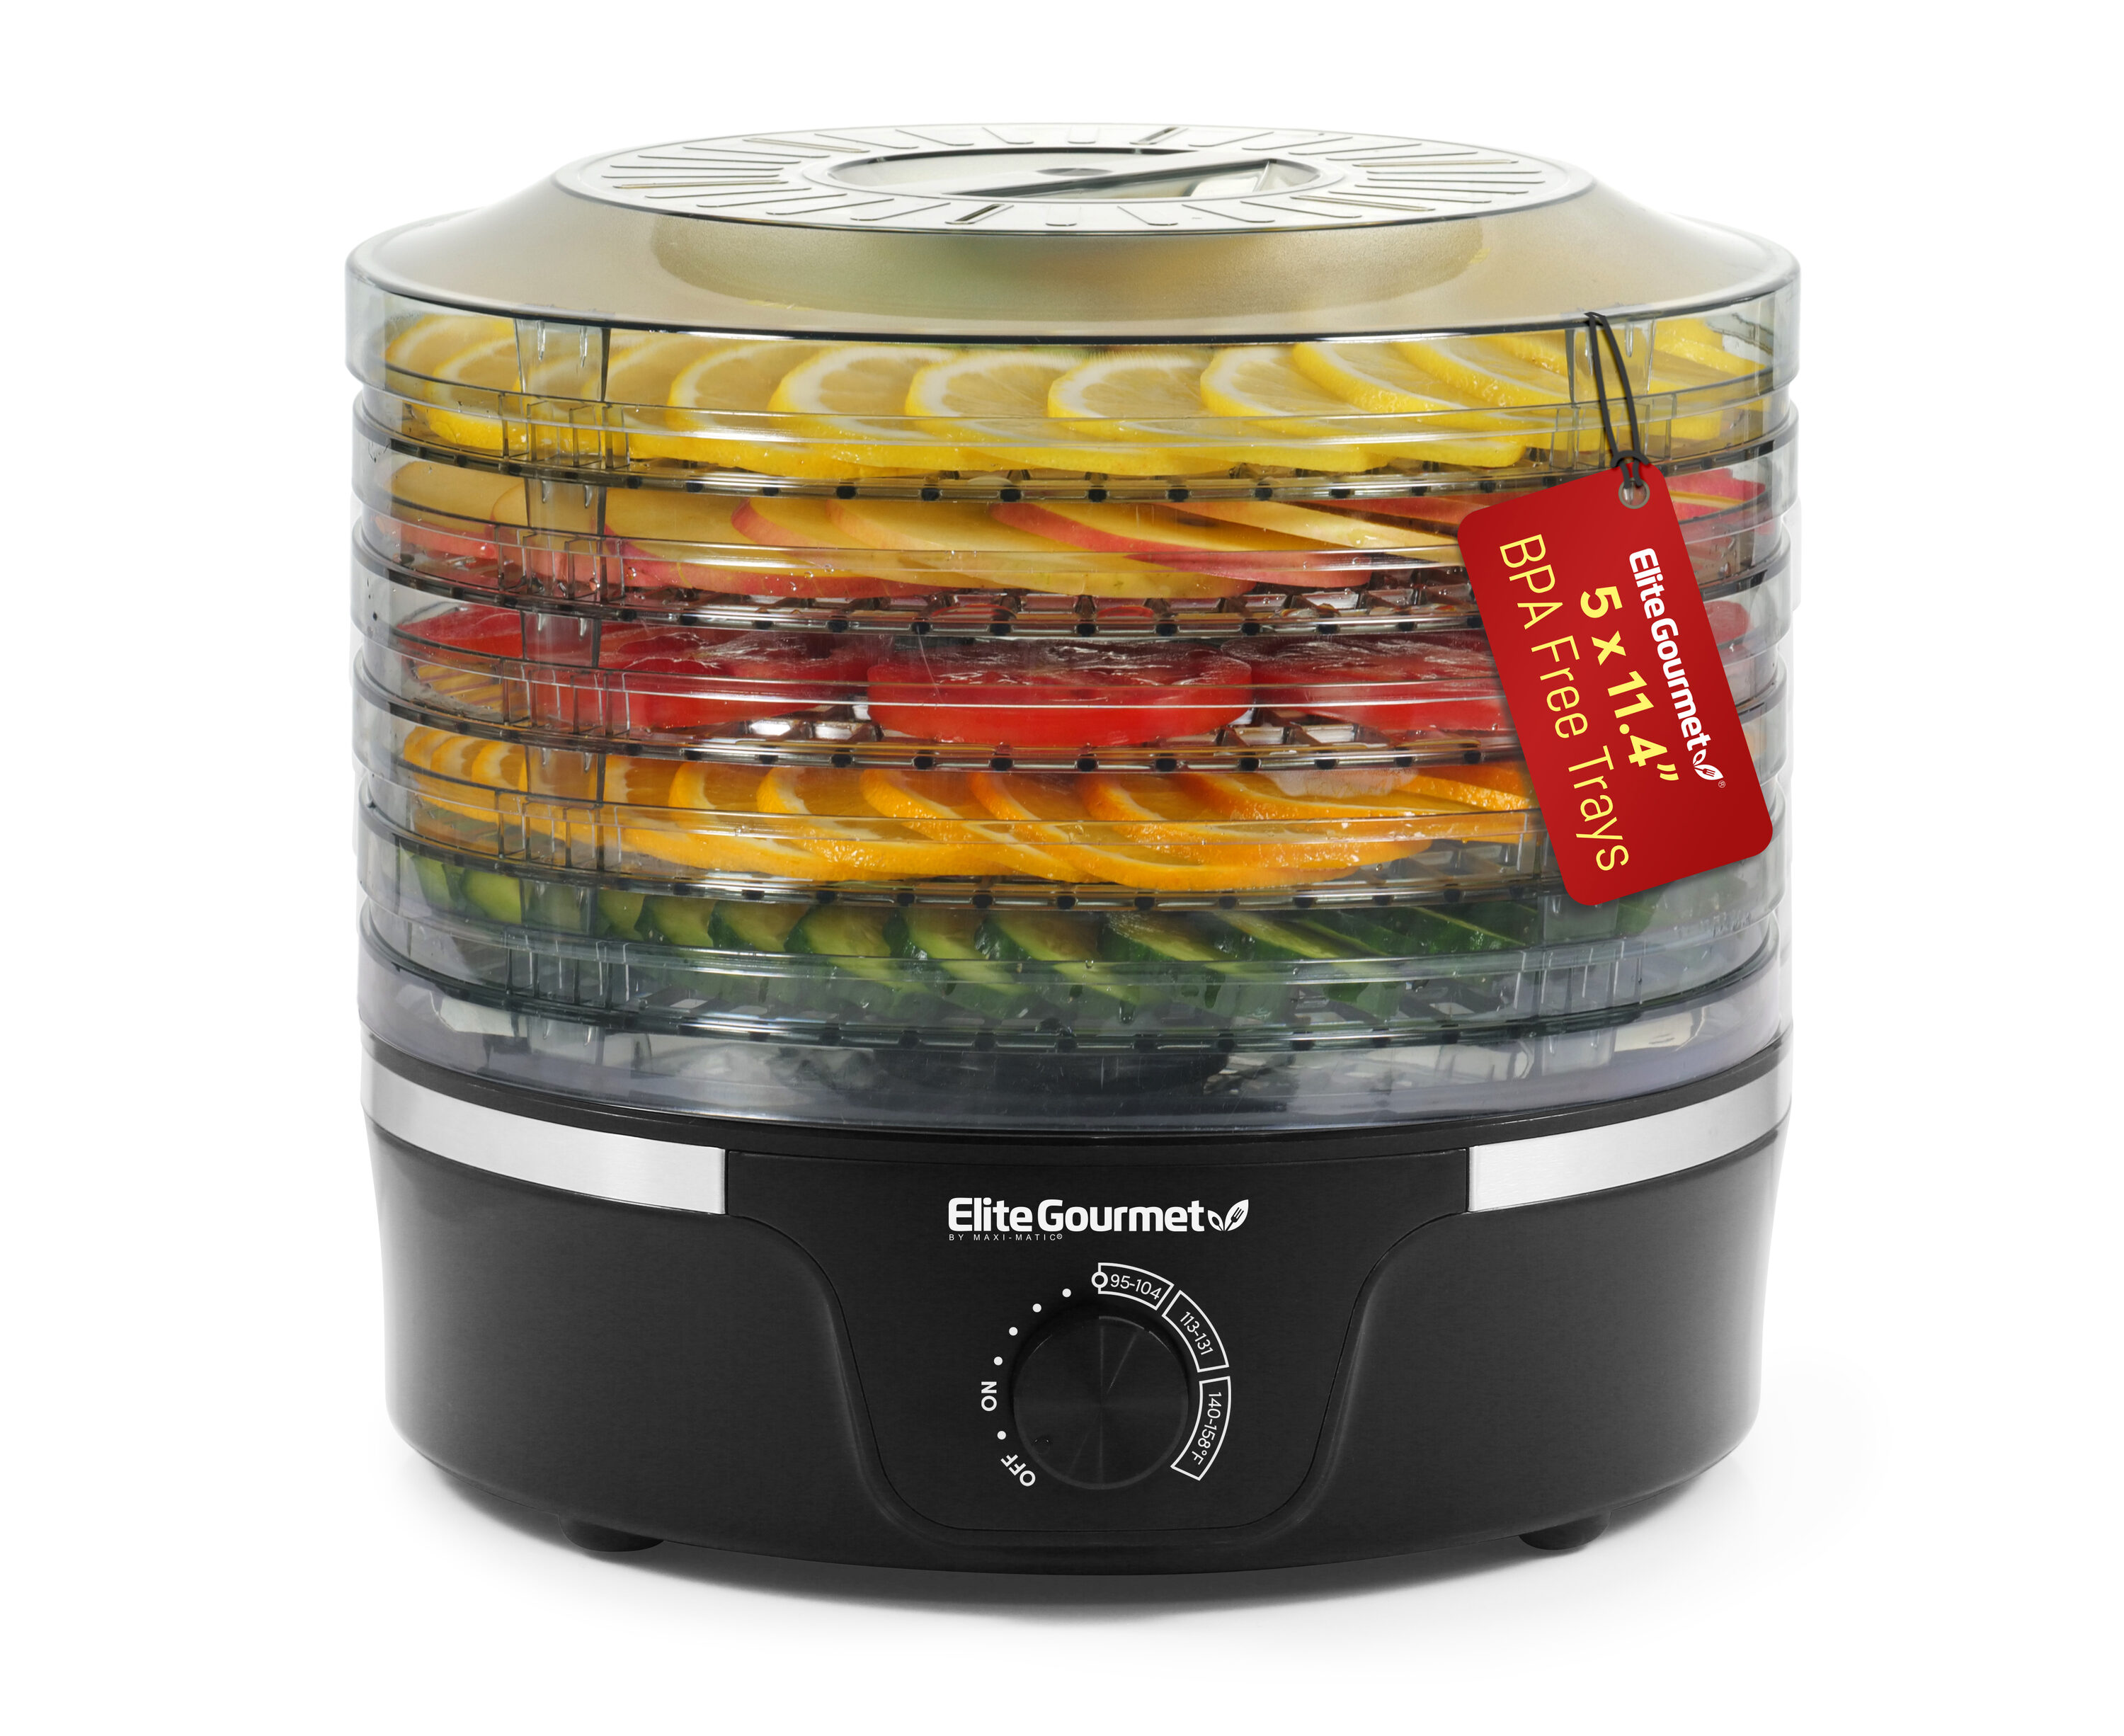 9 Genius Ways To Use Your Dehydrator - The Flexible Chef